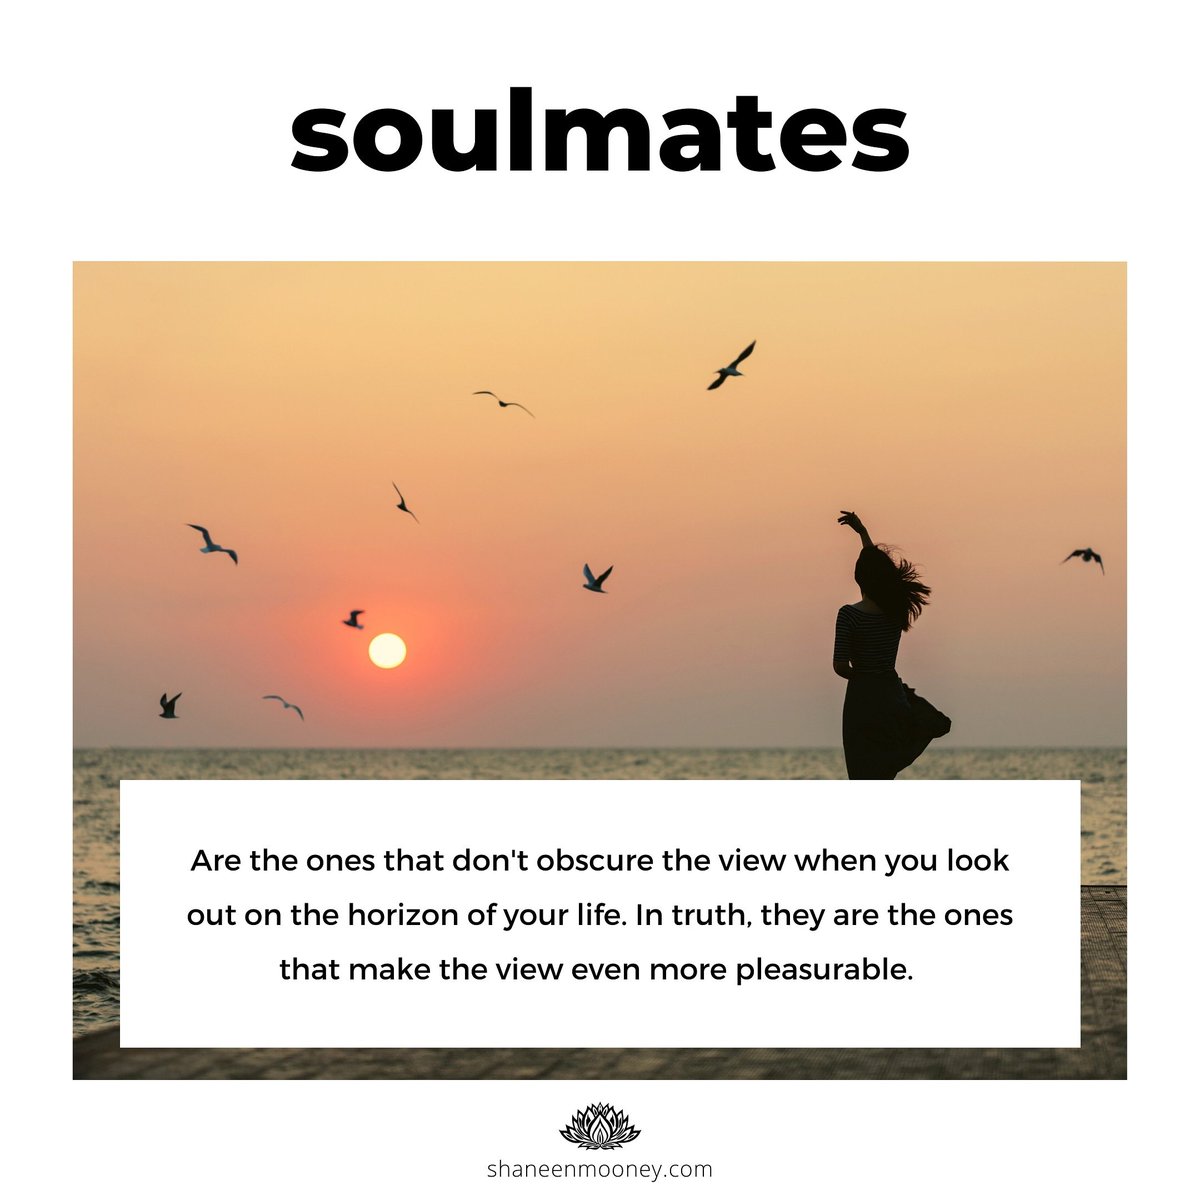 #soulmates #soulfamily #brothers #sisters #beingyou #beingfree #beinglove #understanding #onelove #thoughts #feelings #personalblog #experience #mirrorsofthesoul